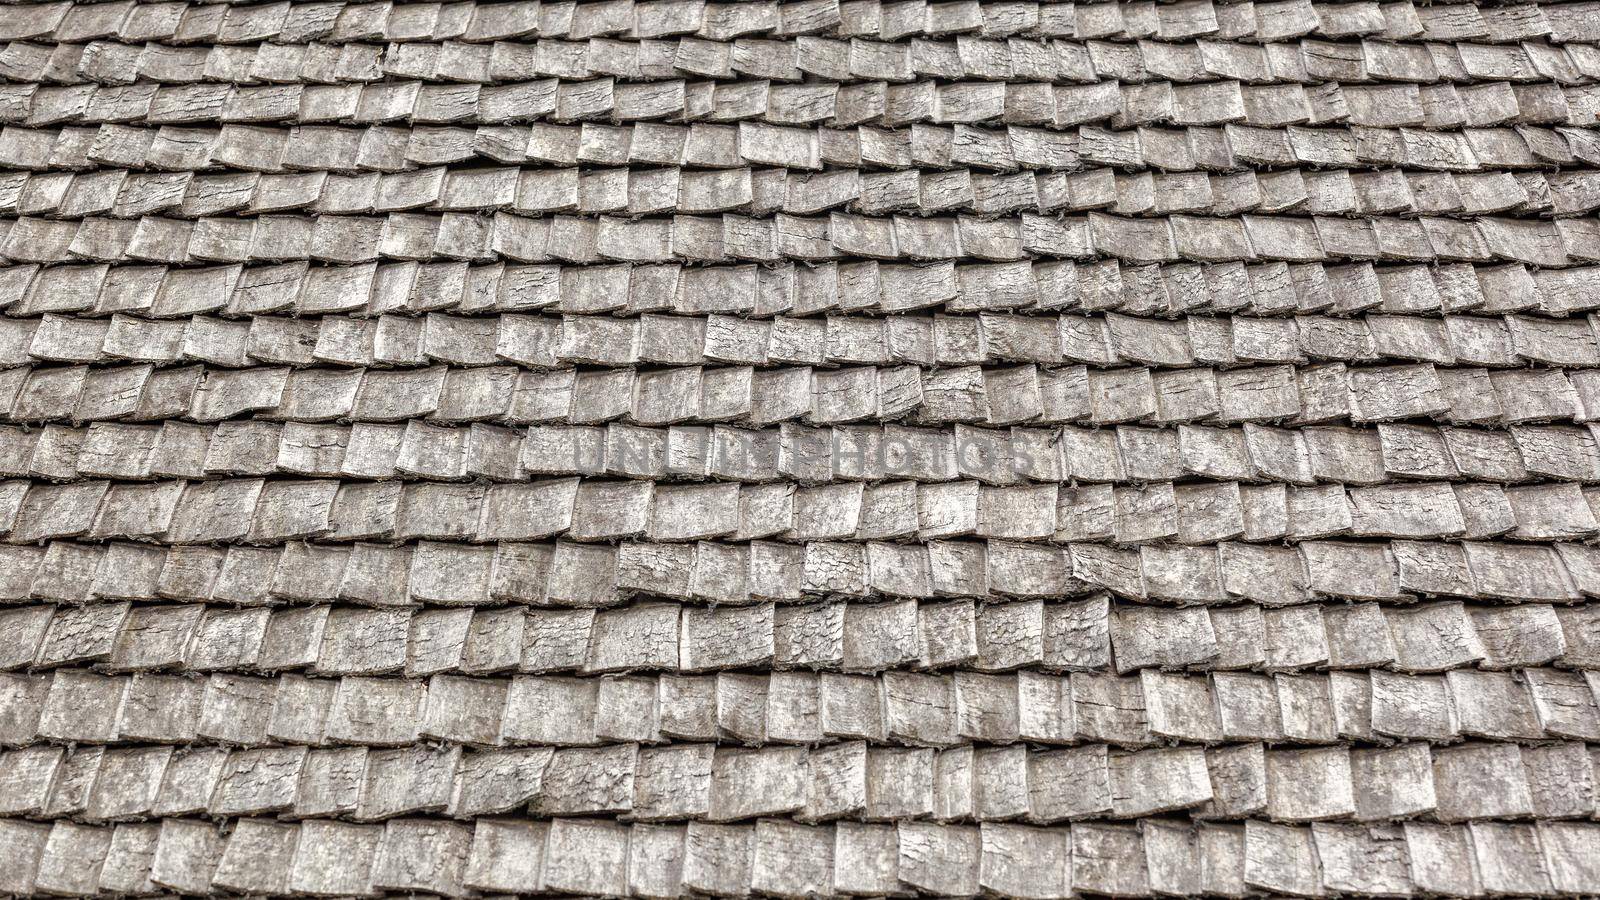 Weathered wooden shingles on a roof. wooden roof tile of old house